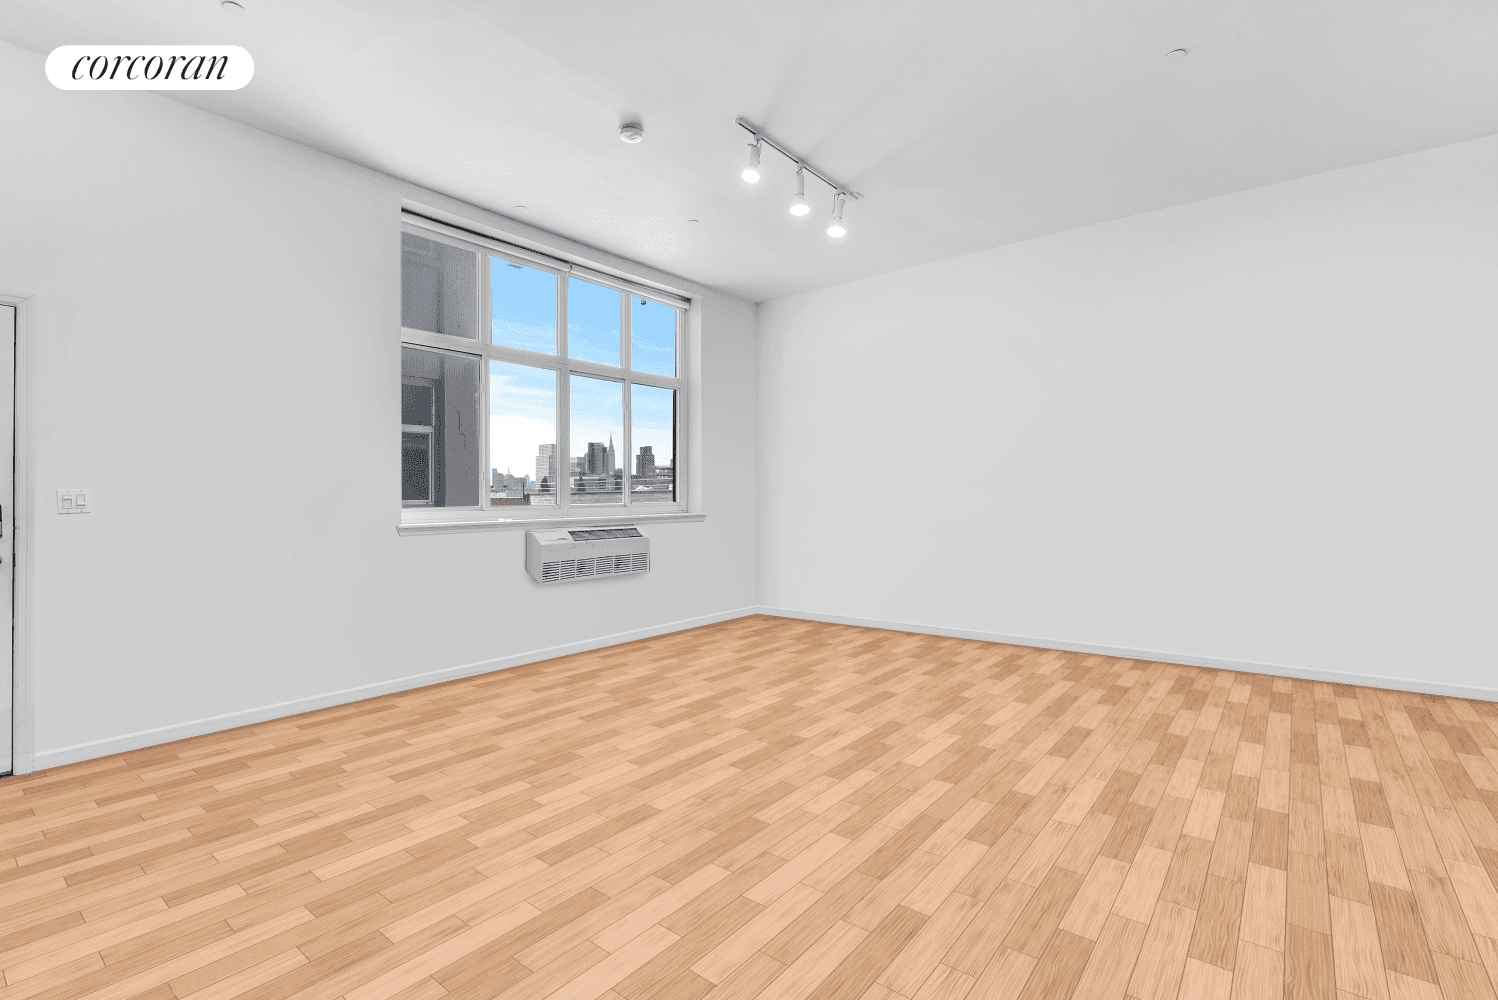 This gorgeous, light filled commercial condo is located in Greenpoint, Brooklyn.